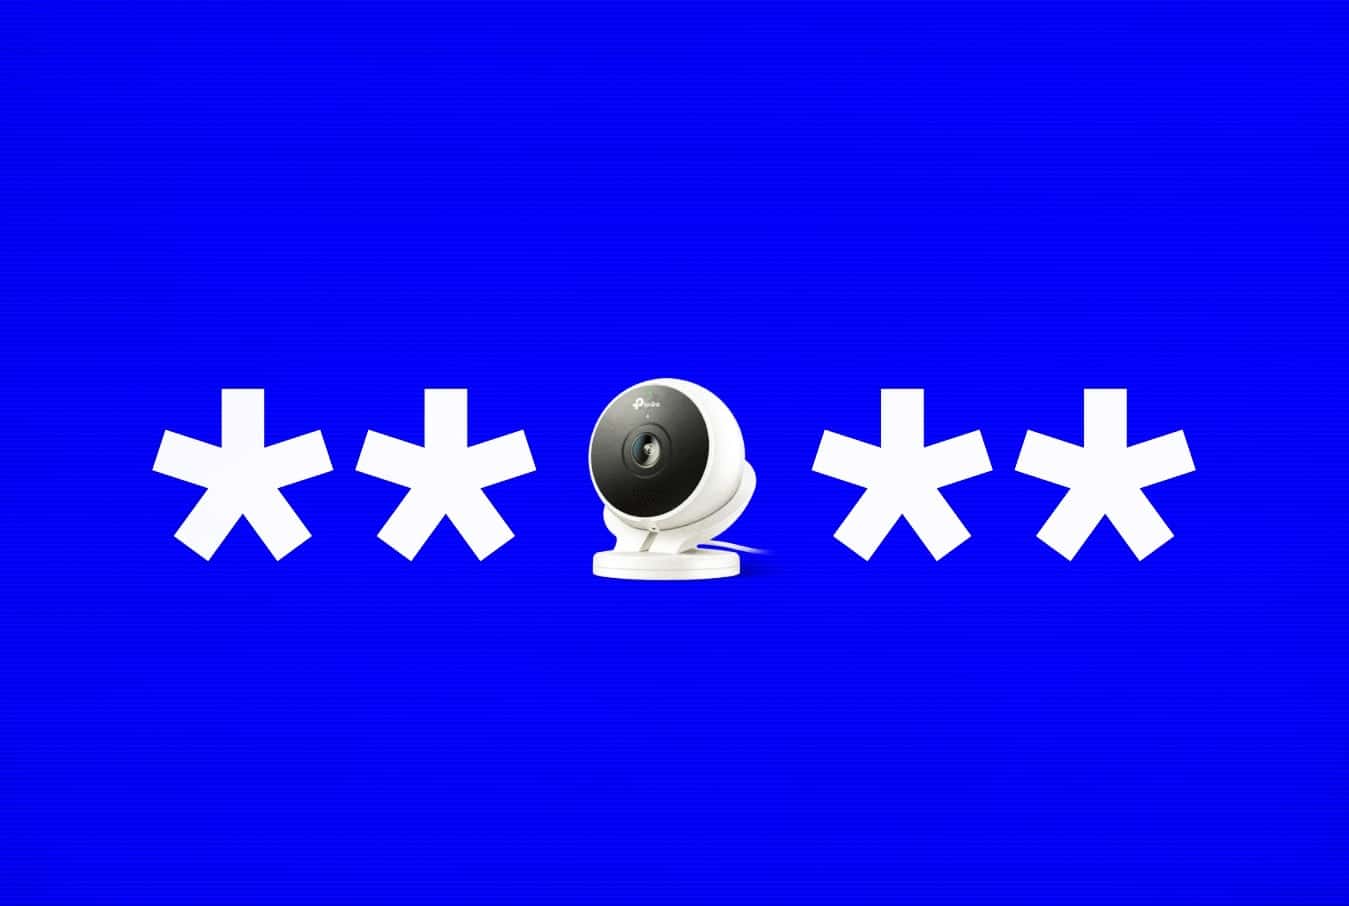 Kasa camera flaw allows enumerating usernames for credential stuffing